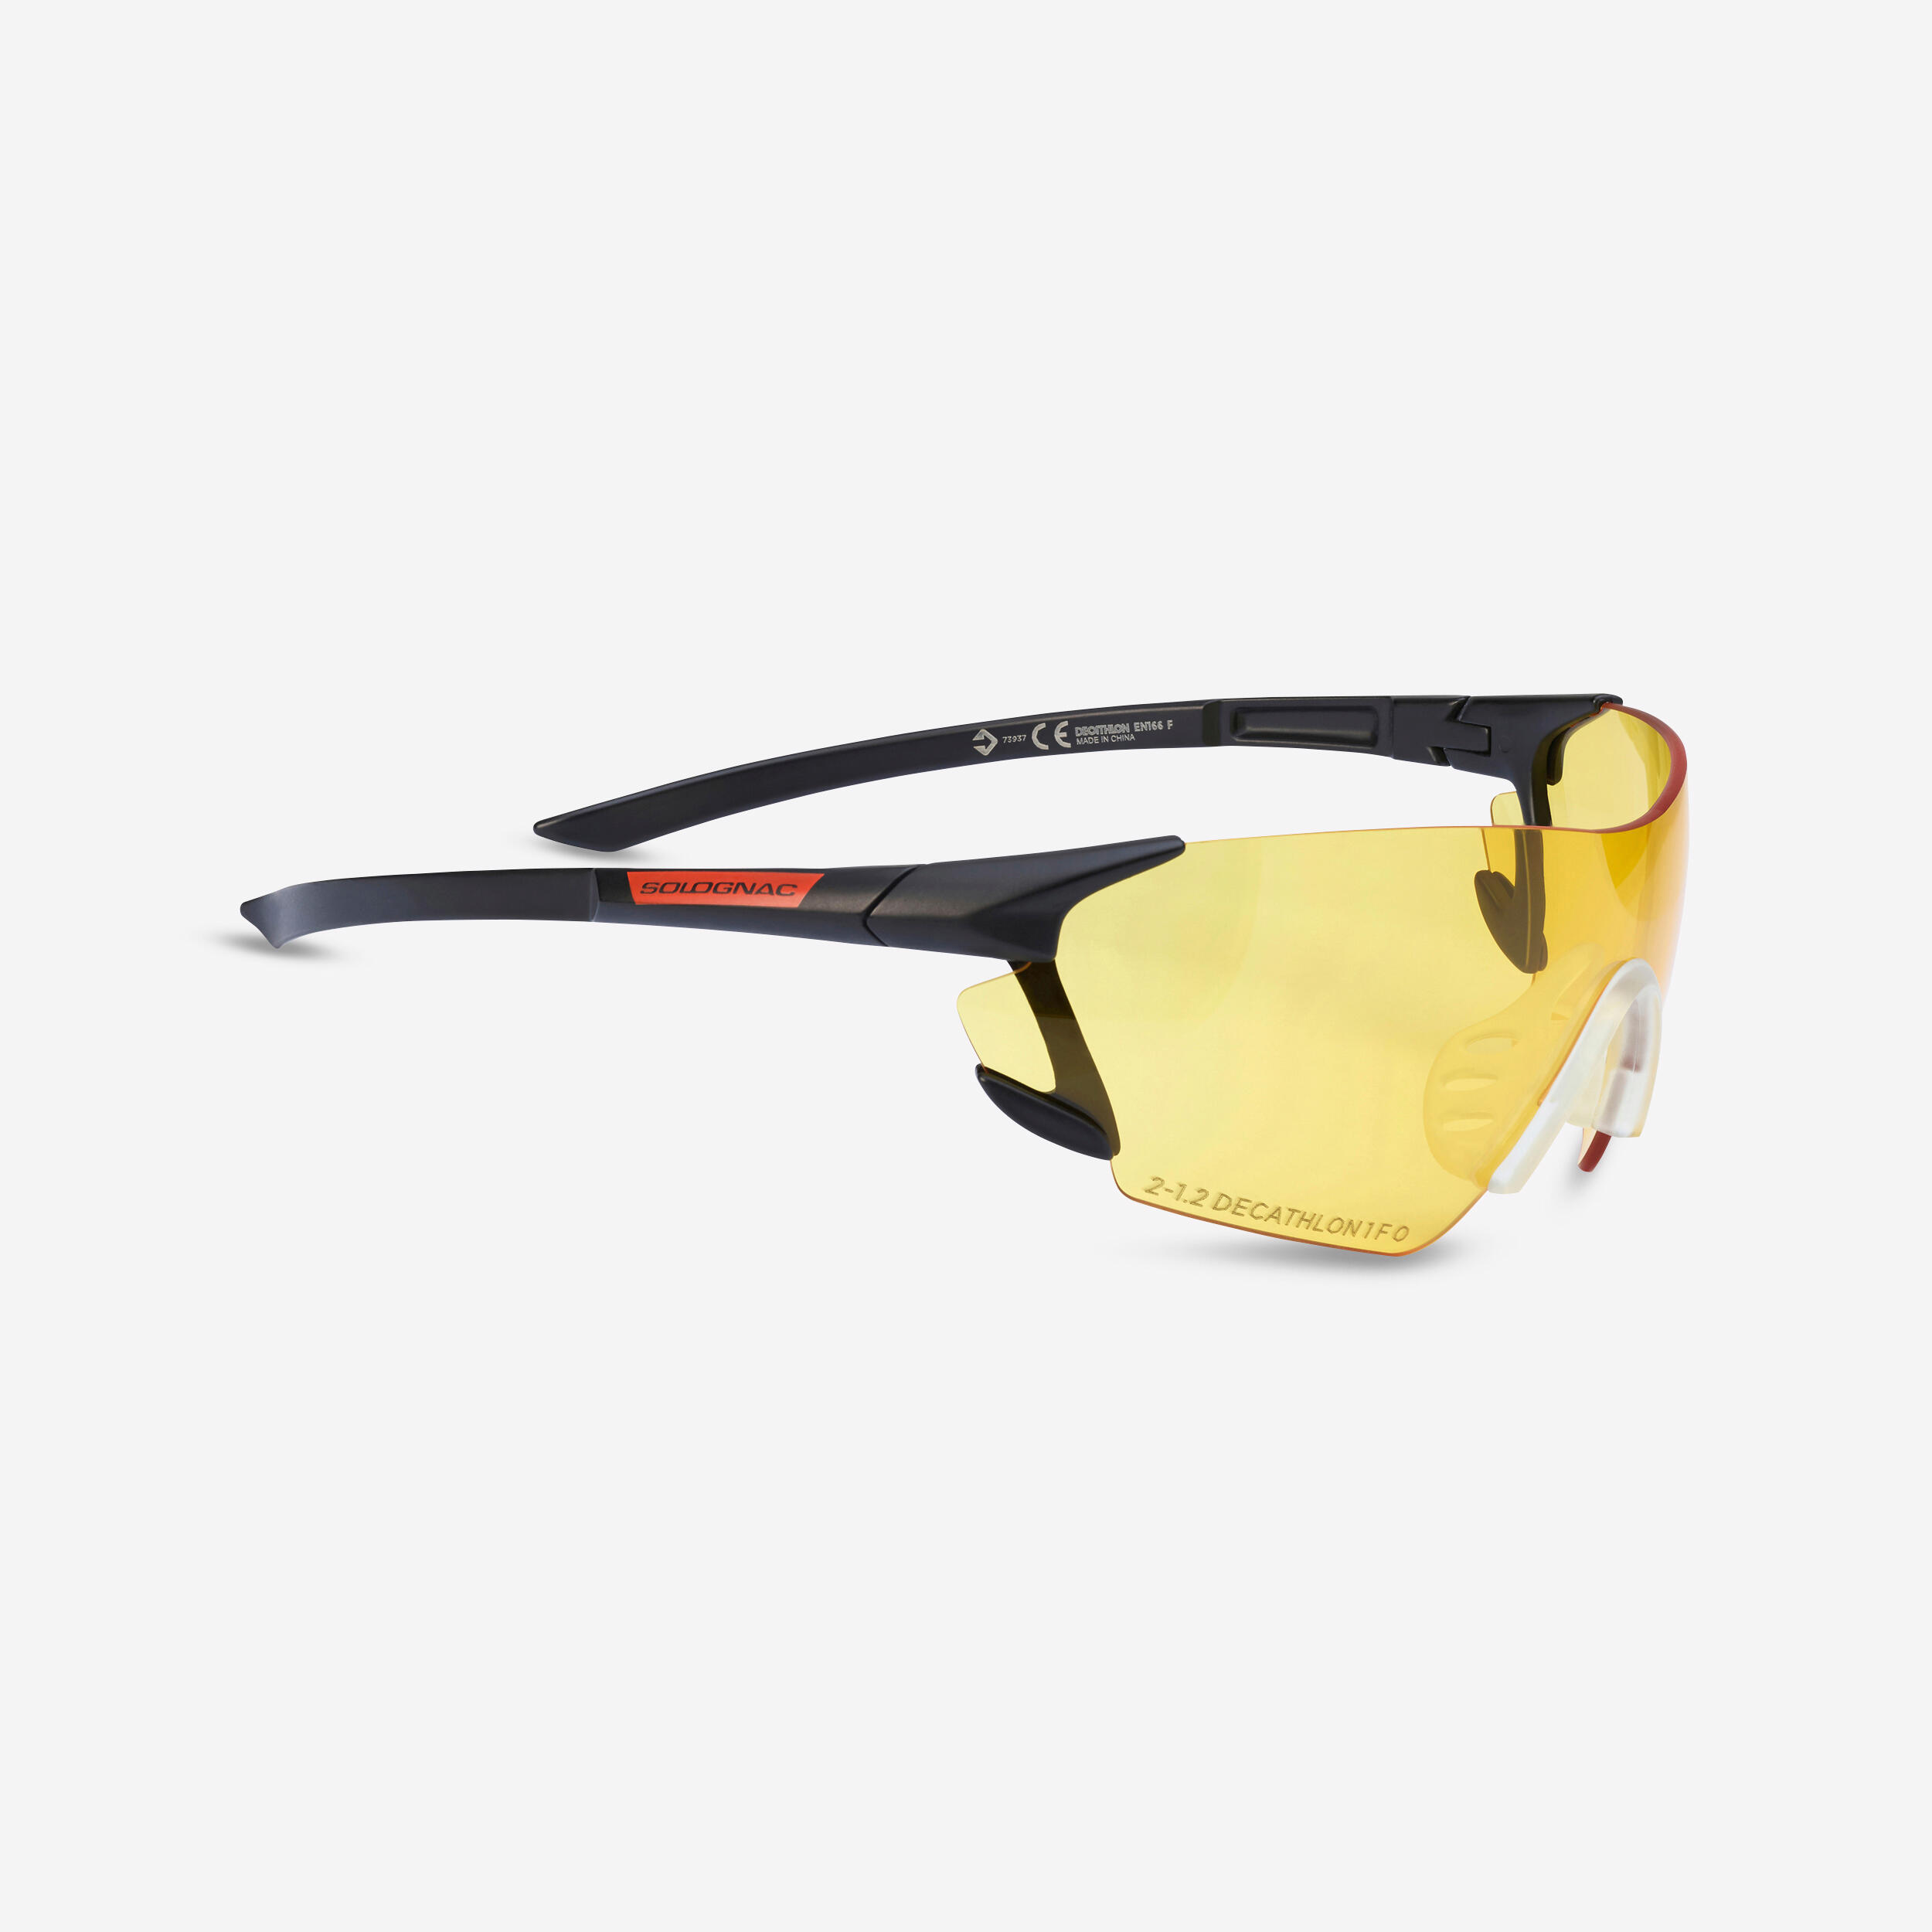 CLAY PIGEON SHOOTING PROTECTIVE GLASSES 100, YELLOW STRONG LENSES, CATEGORY 1 1/3